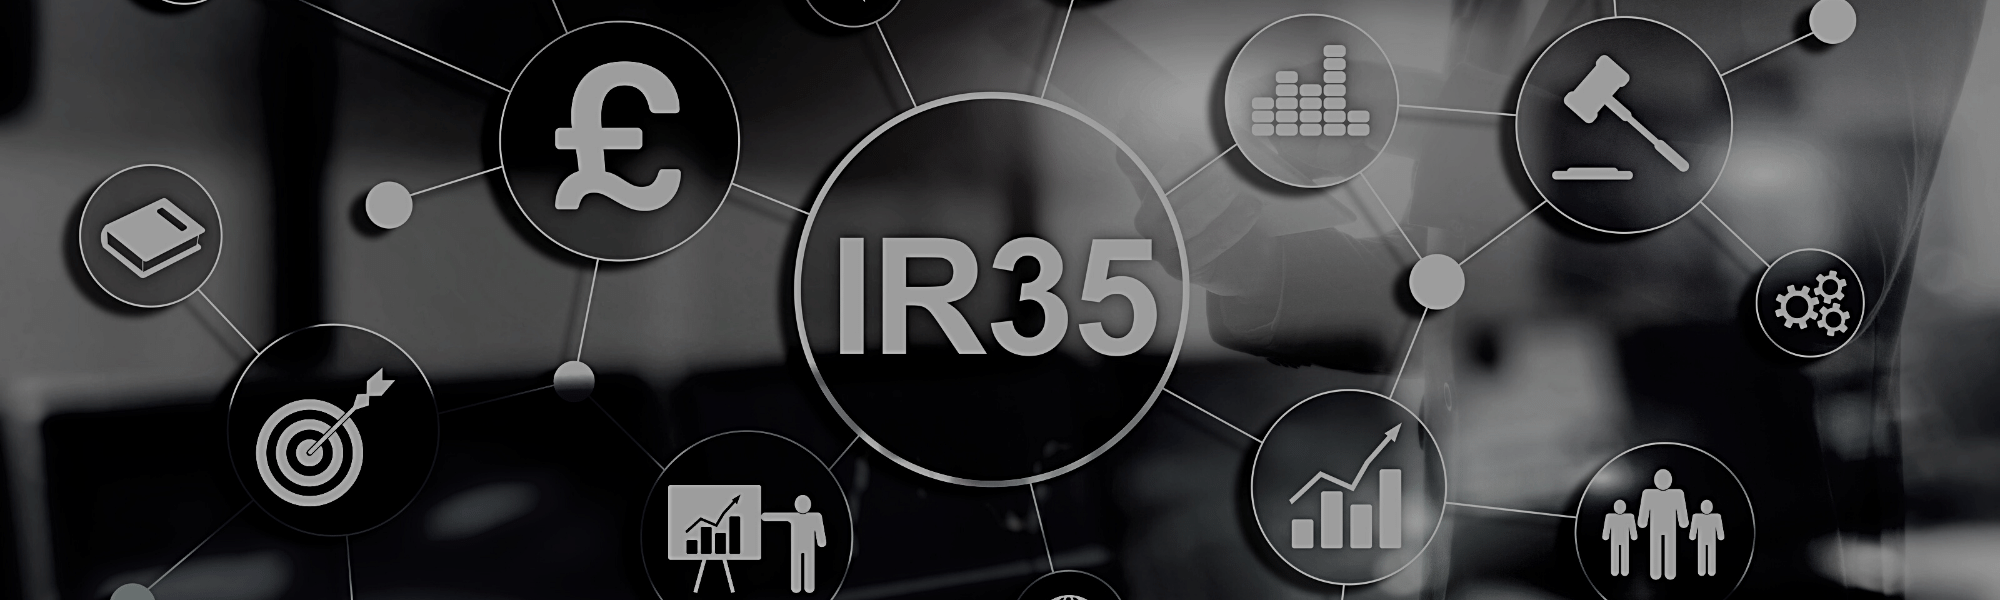 Are your freelancers compliant before IR35 changes in April 2020?